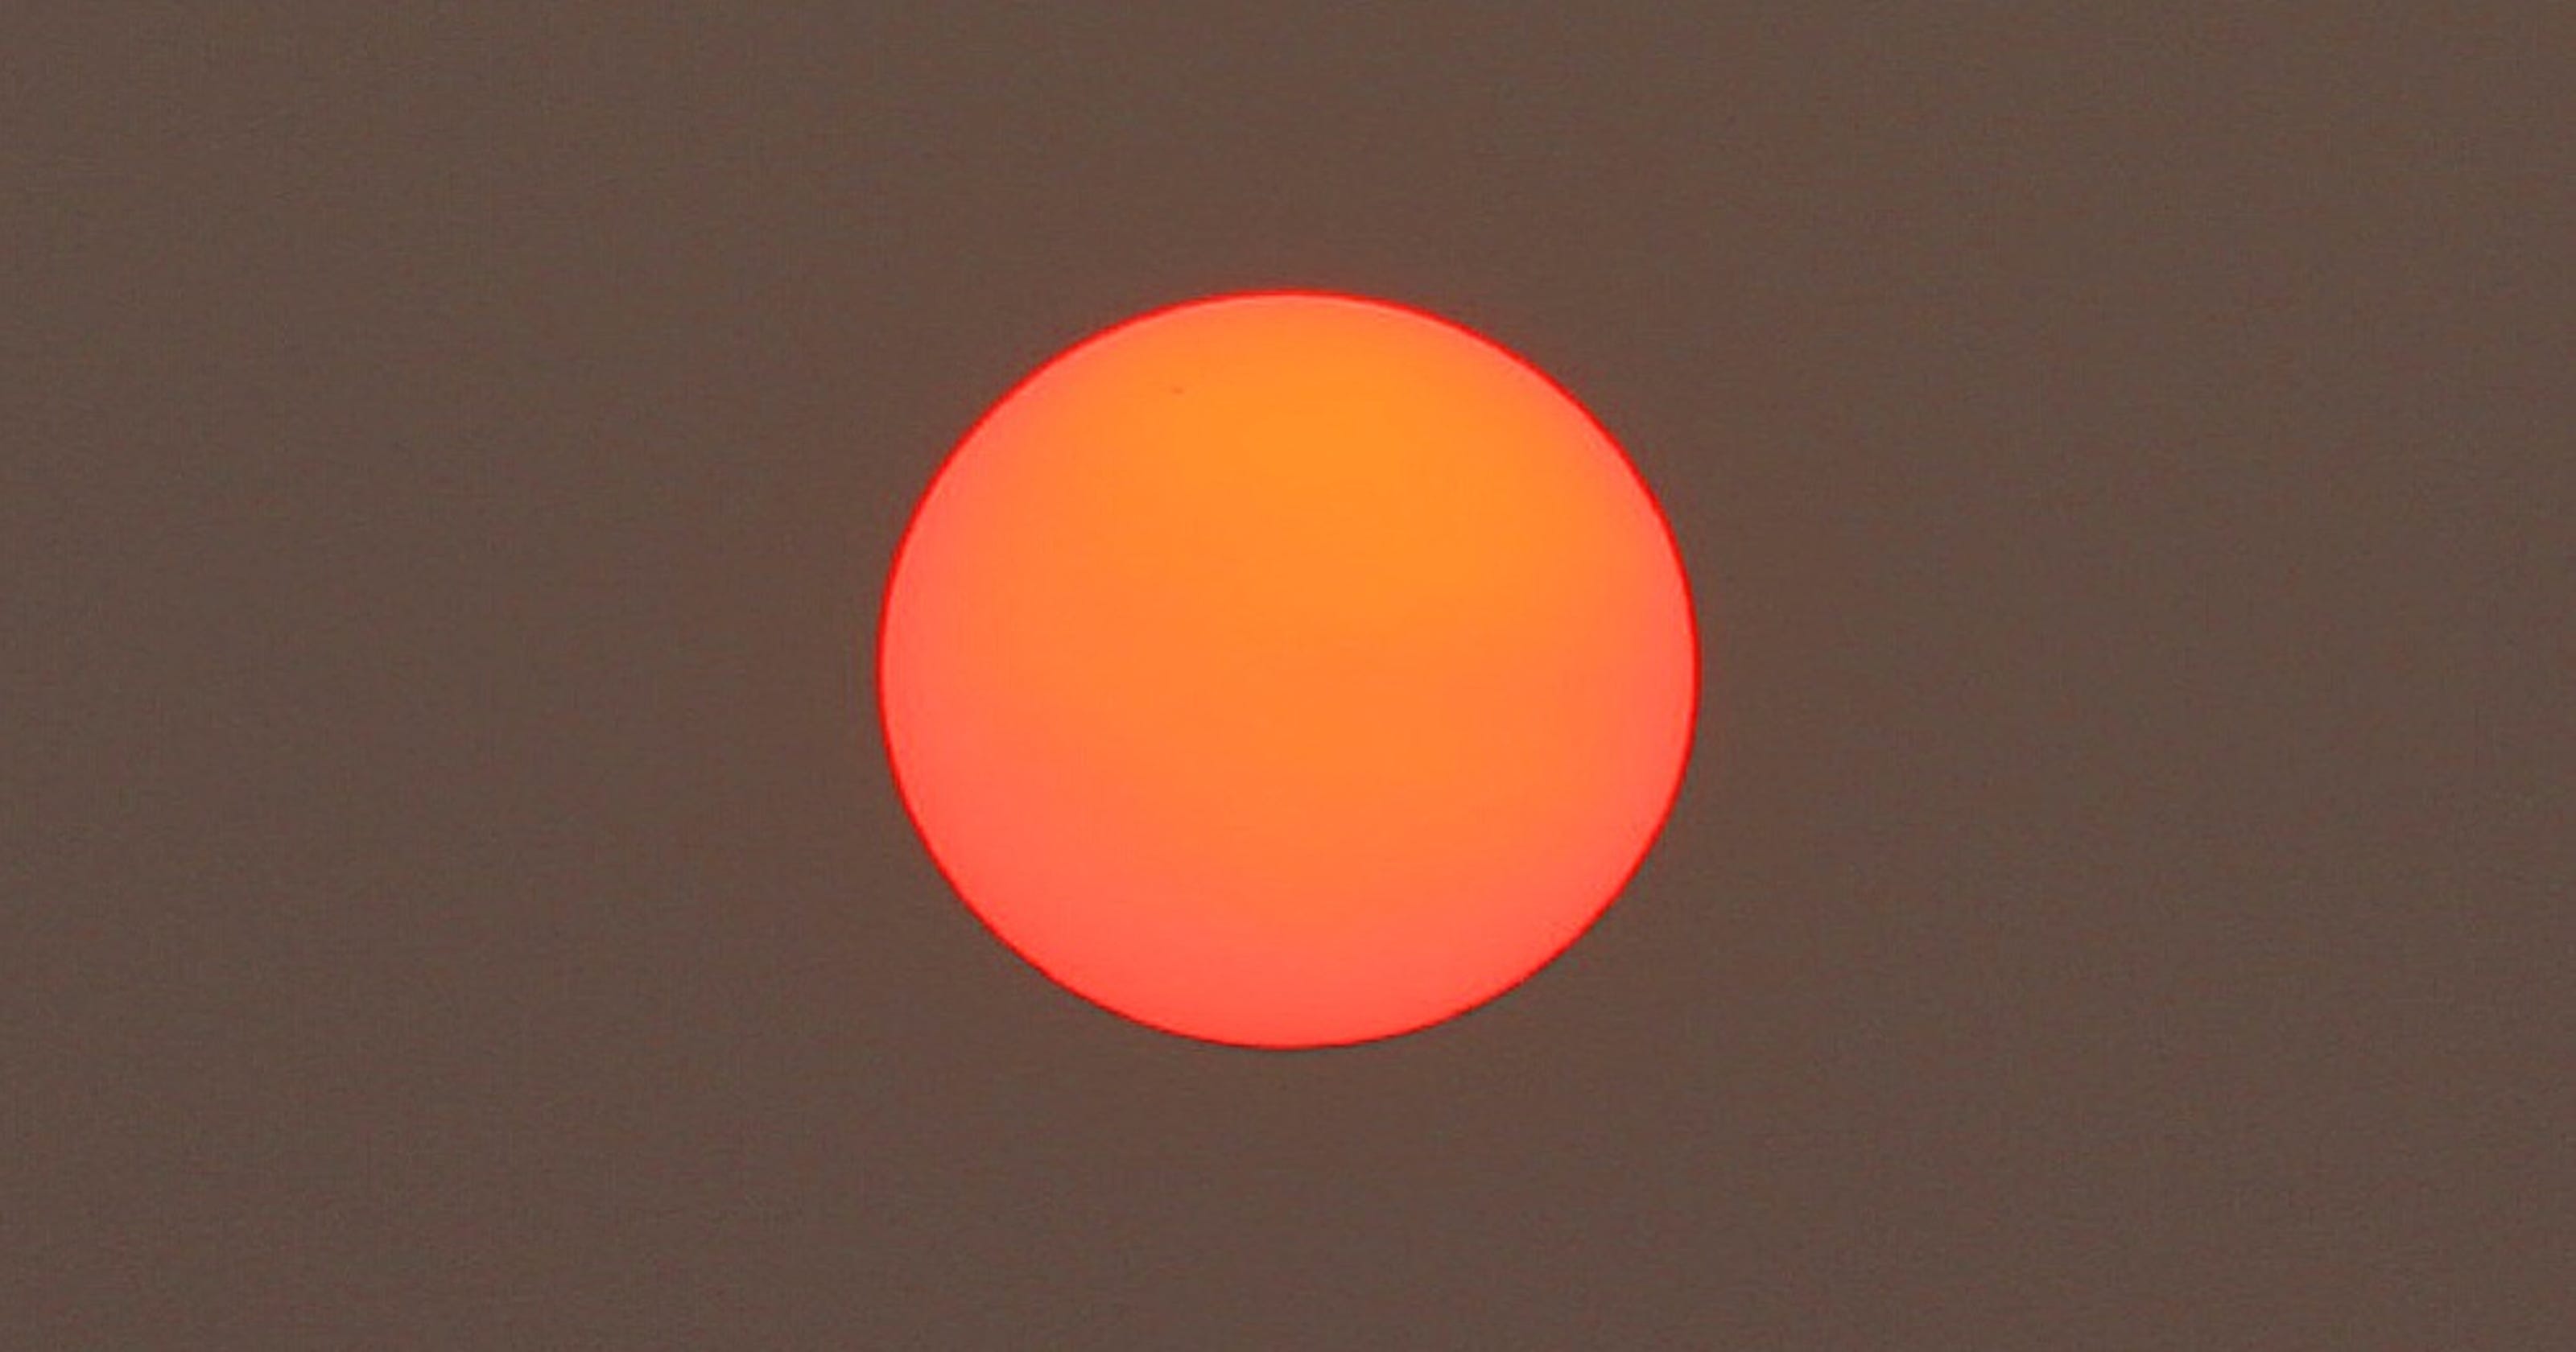 Meteorologist explains why the sun looks particularly red right now